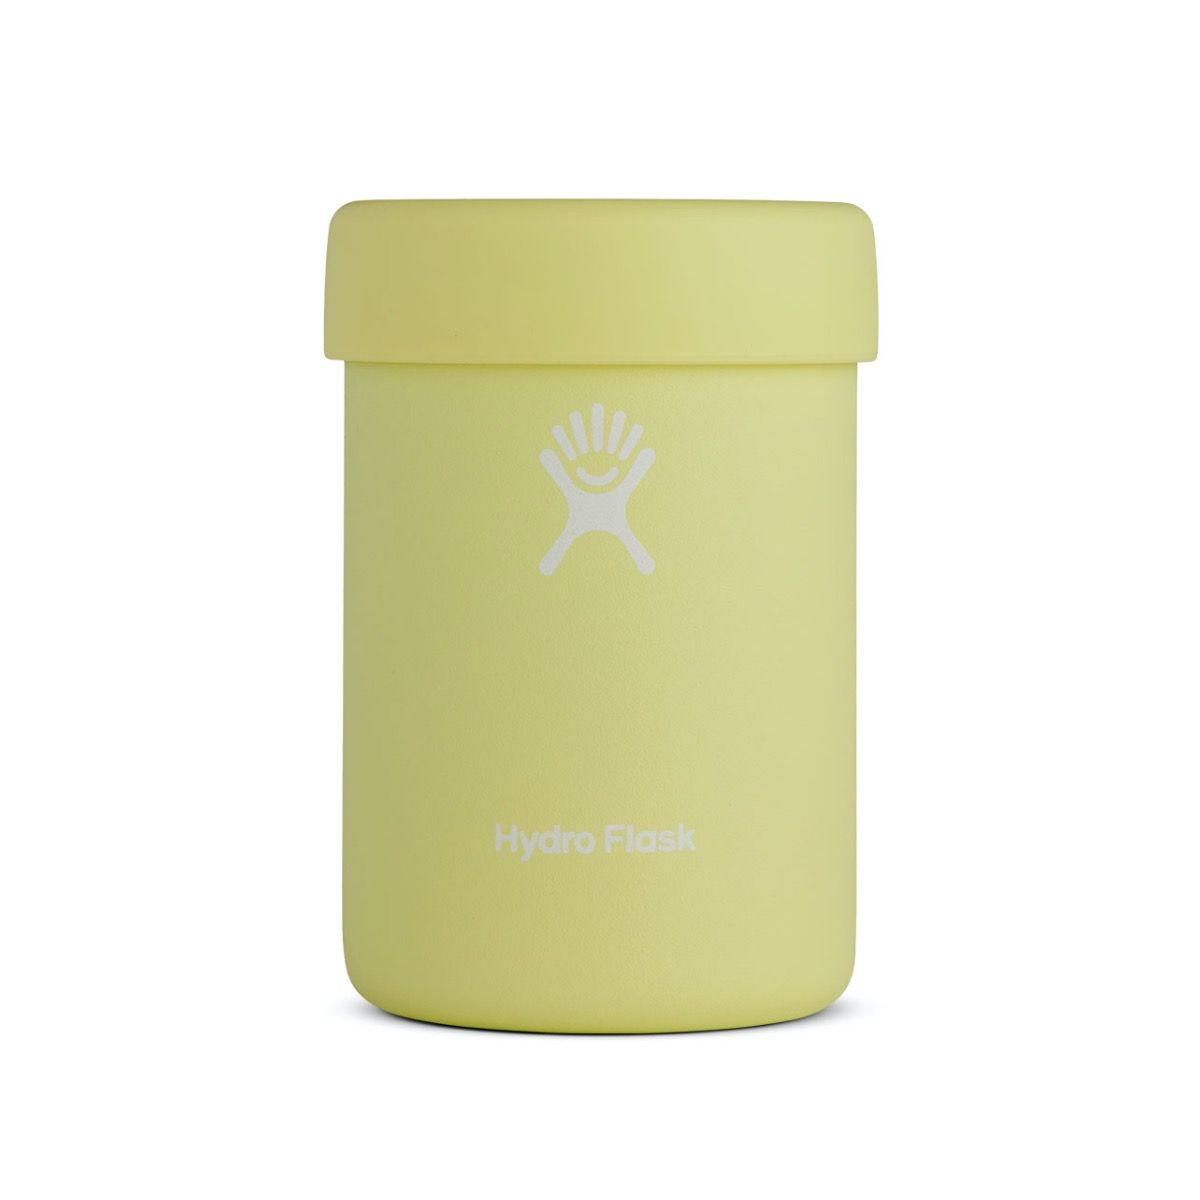 Hydroflask Insulated 12 oz Cooler Cup